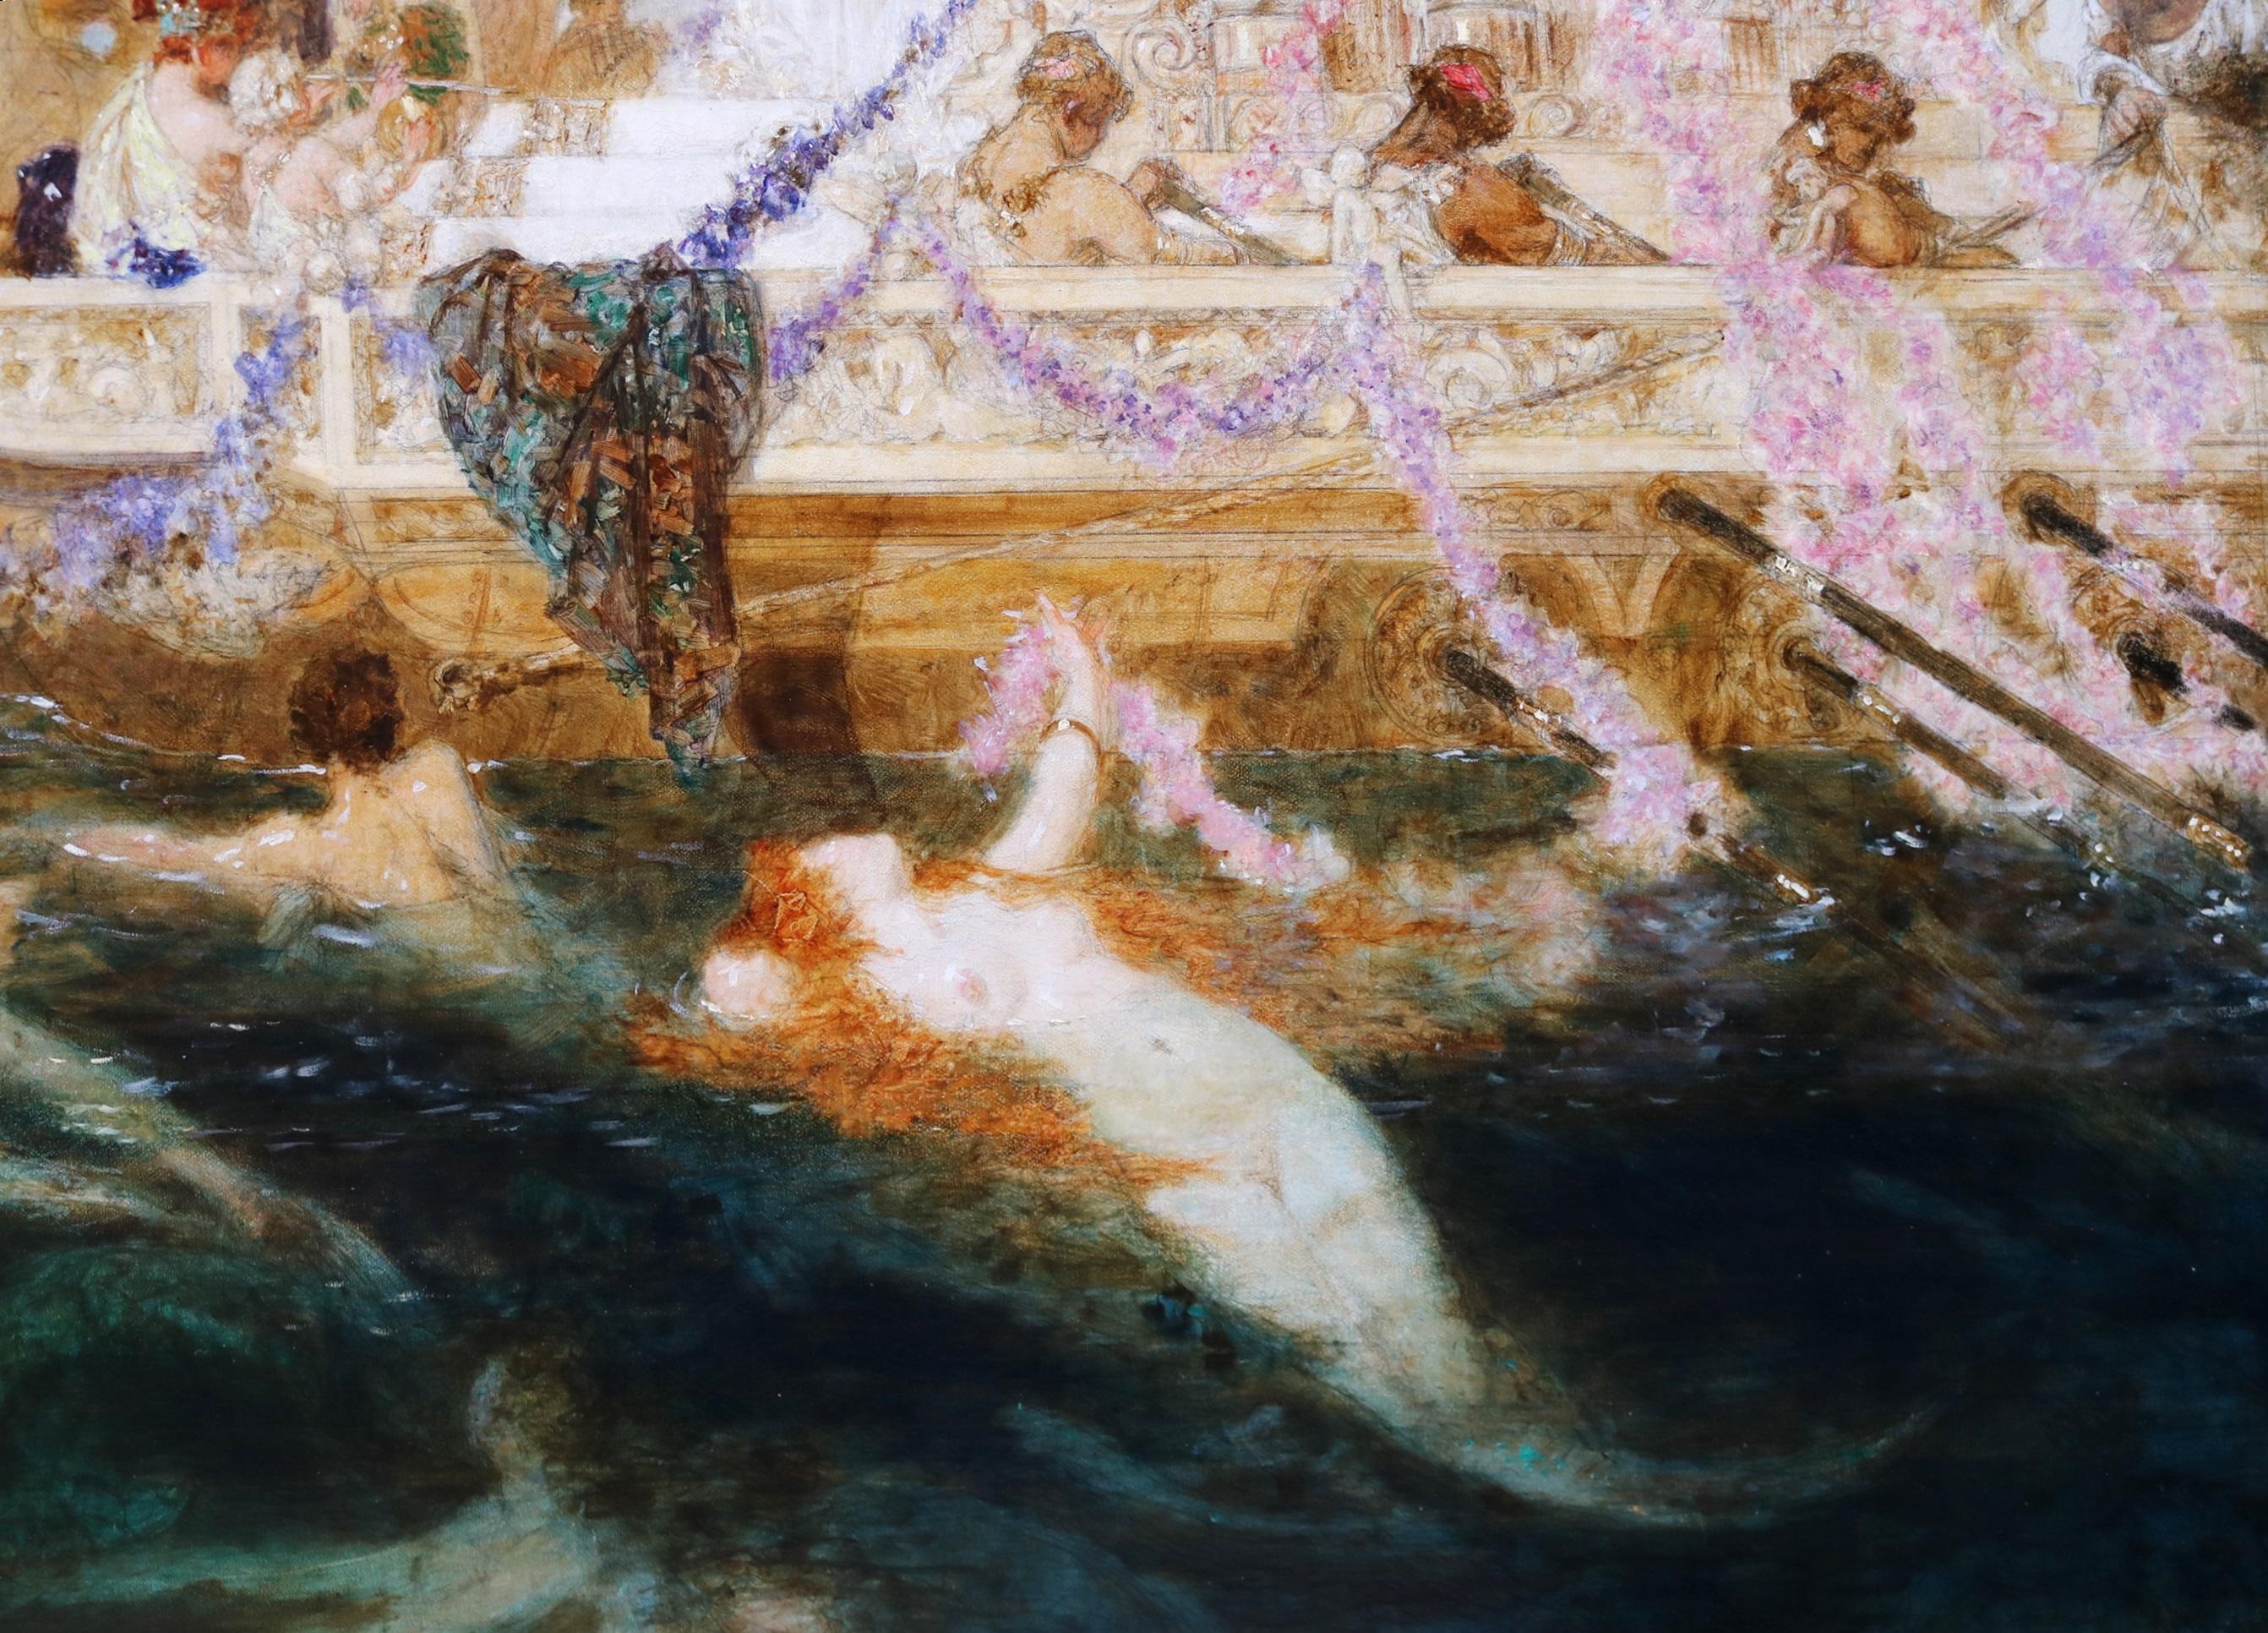 ‘The Triumph of Amphitrite’ By Alexander Rothaug 1870–1946. The painting – which depicts the sea chariot of the Greek Goddess Amphitrite and her retinue of Hippocampi, Nereids, and Tritons – is signed by the artist and presented in a newly